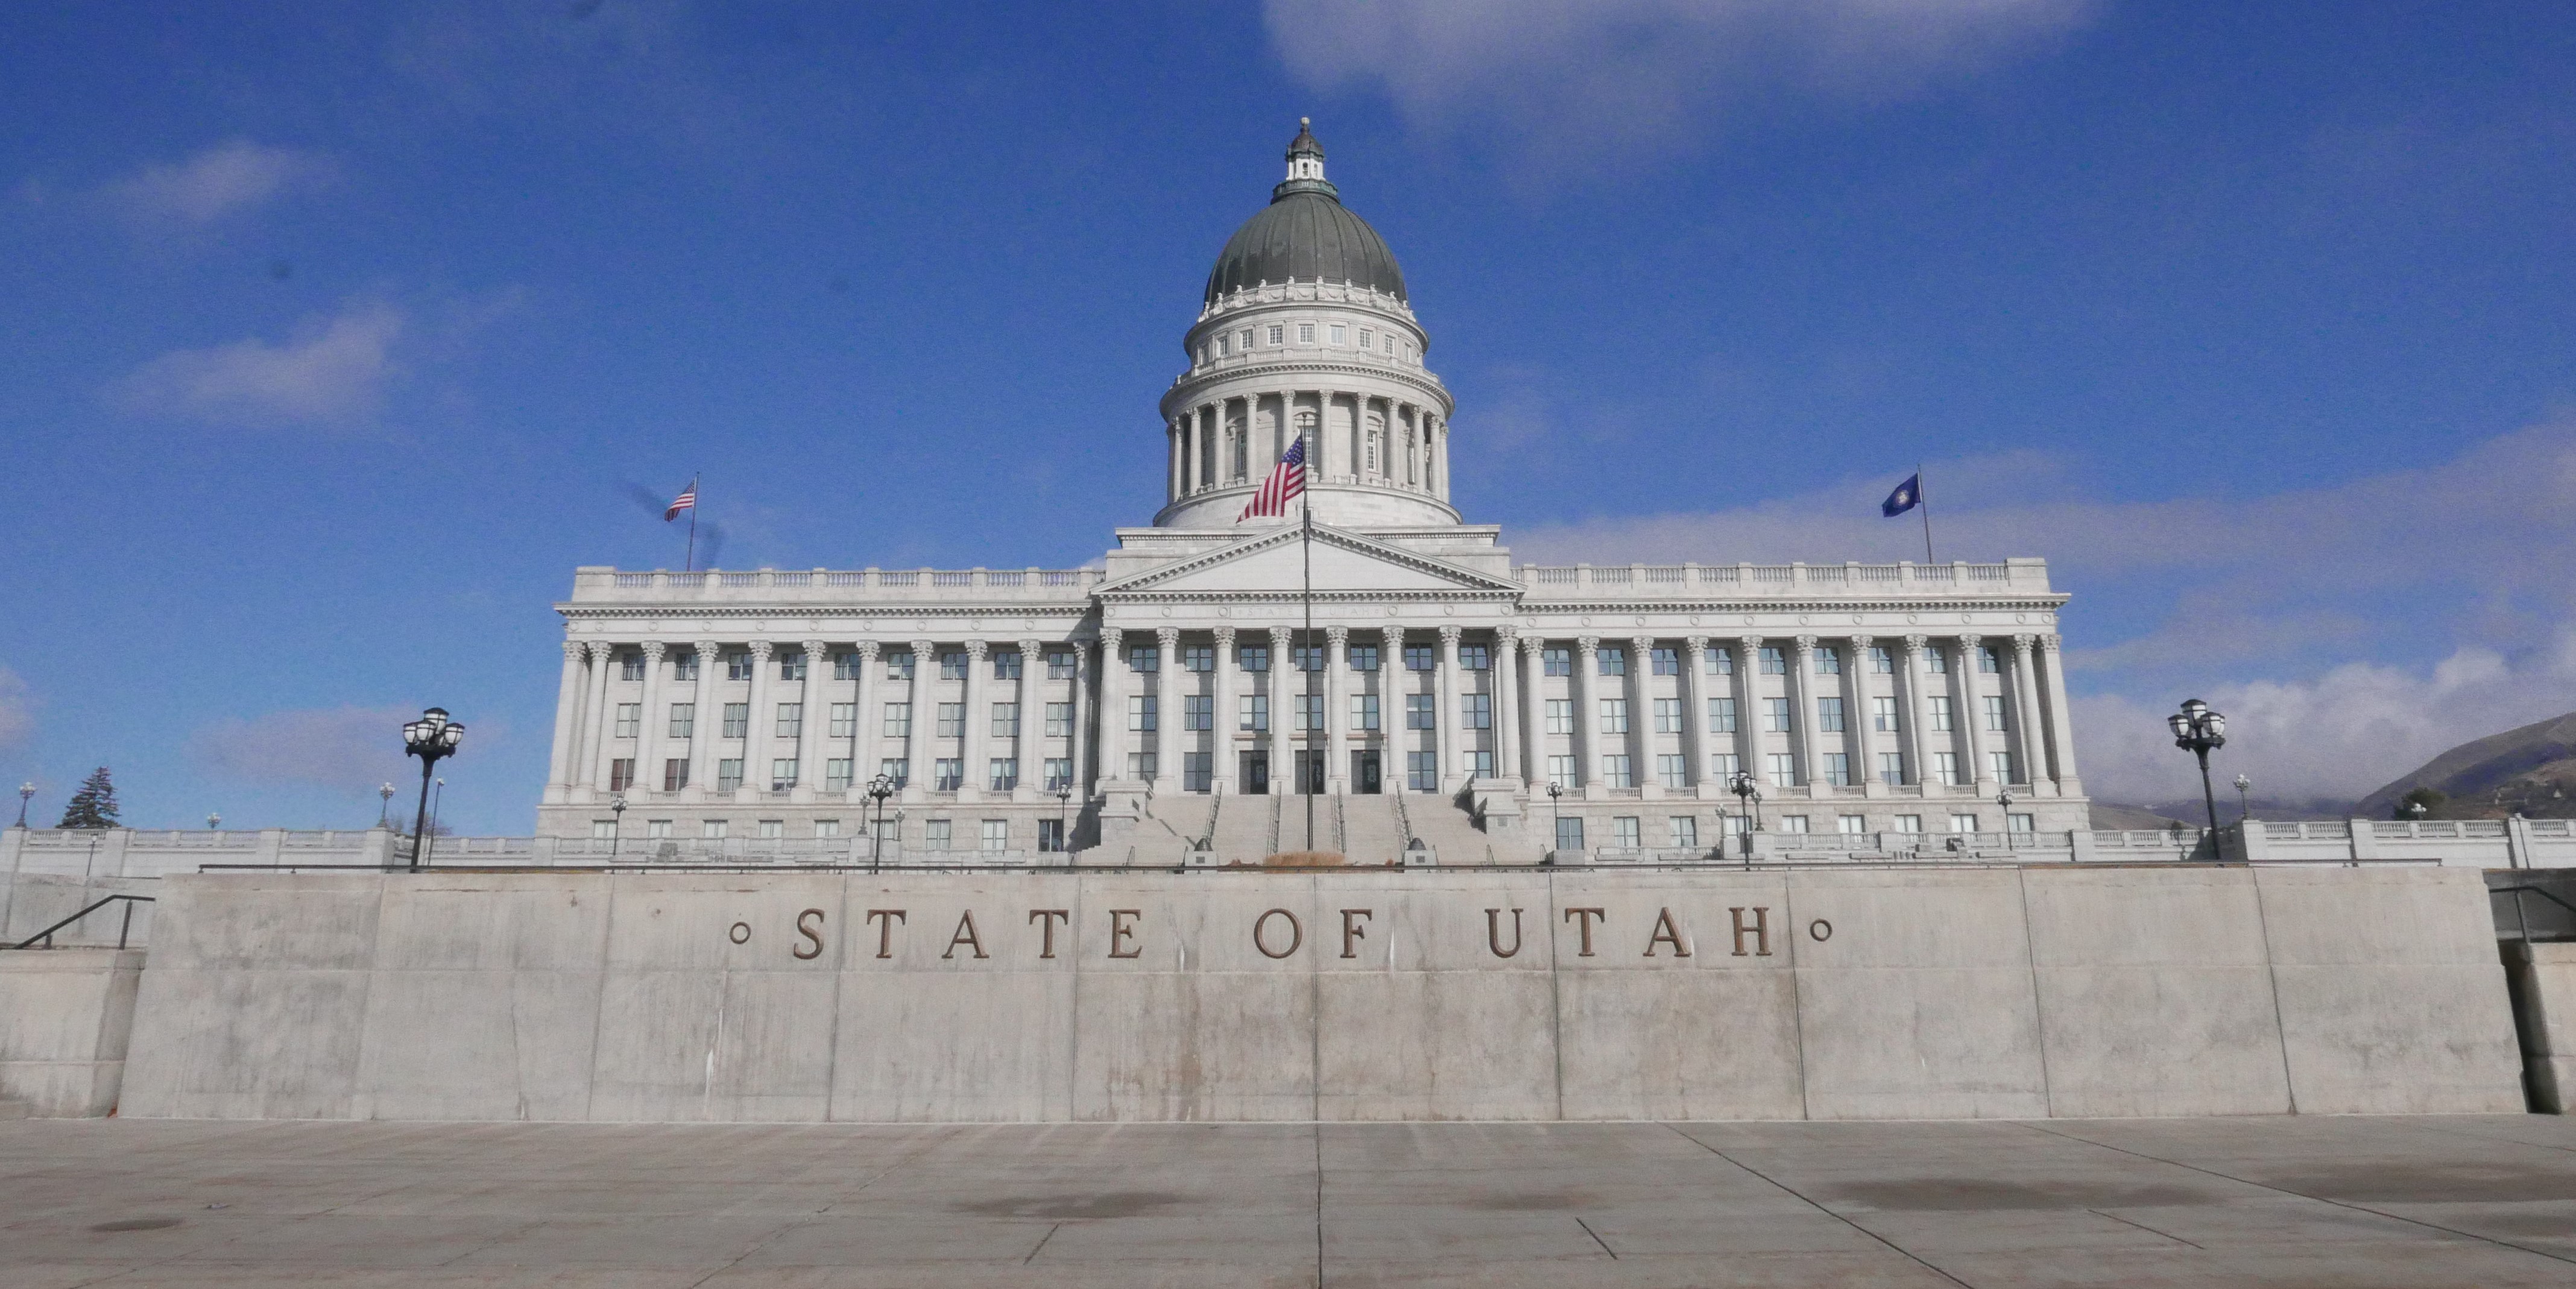 Utah Senate votes to ban all elective abortions upon reversal of Roe v. Wade